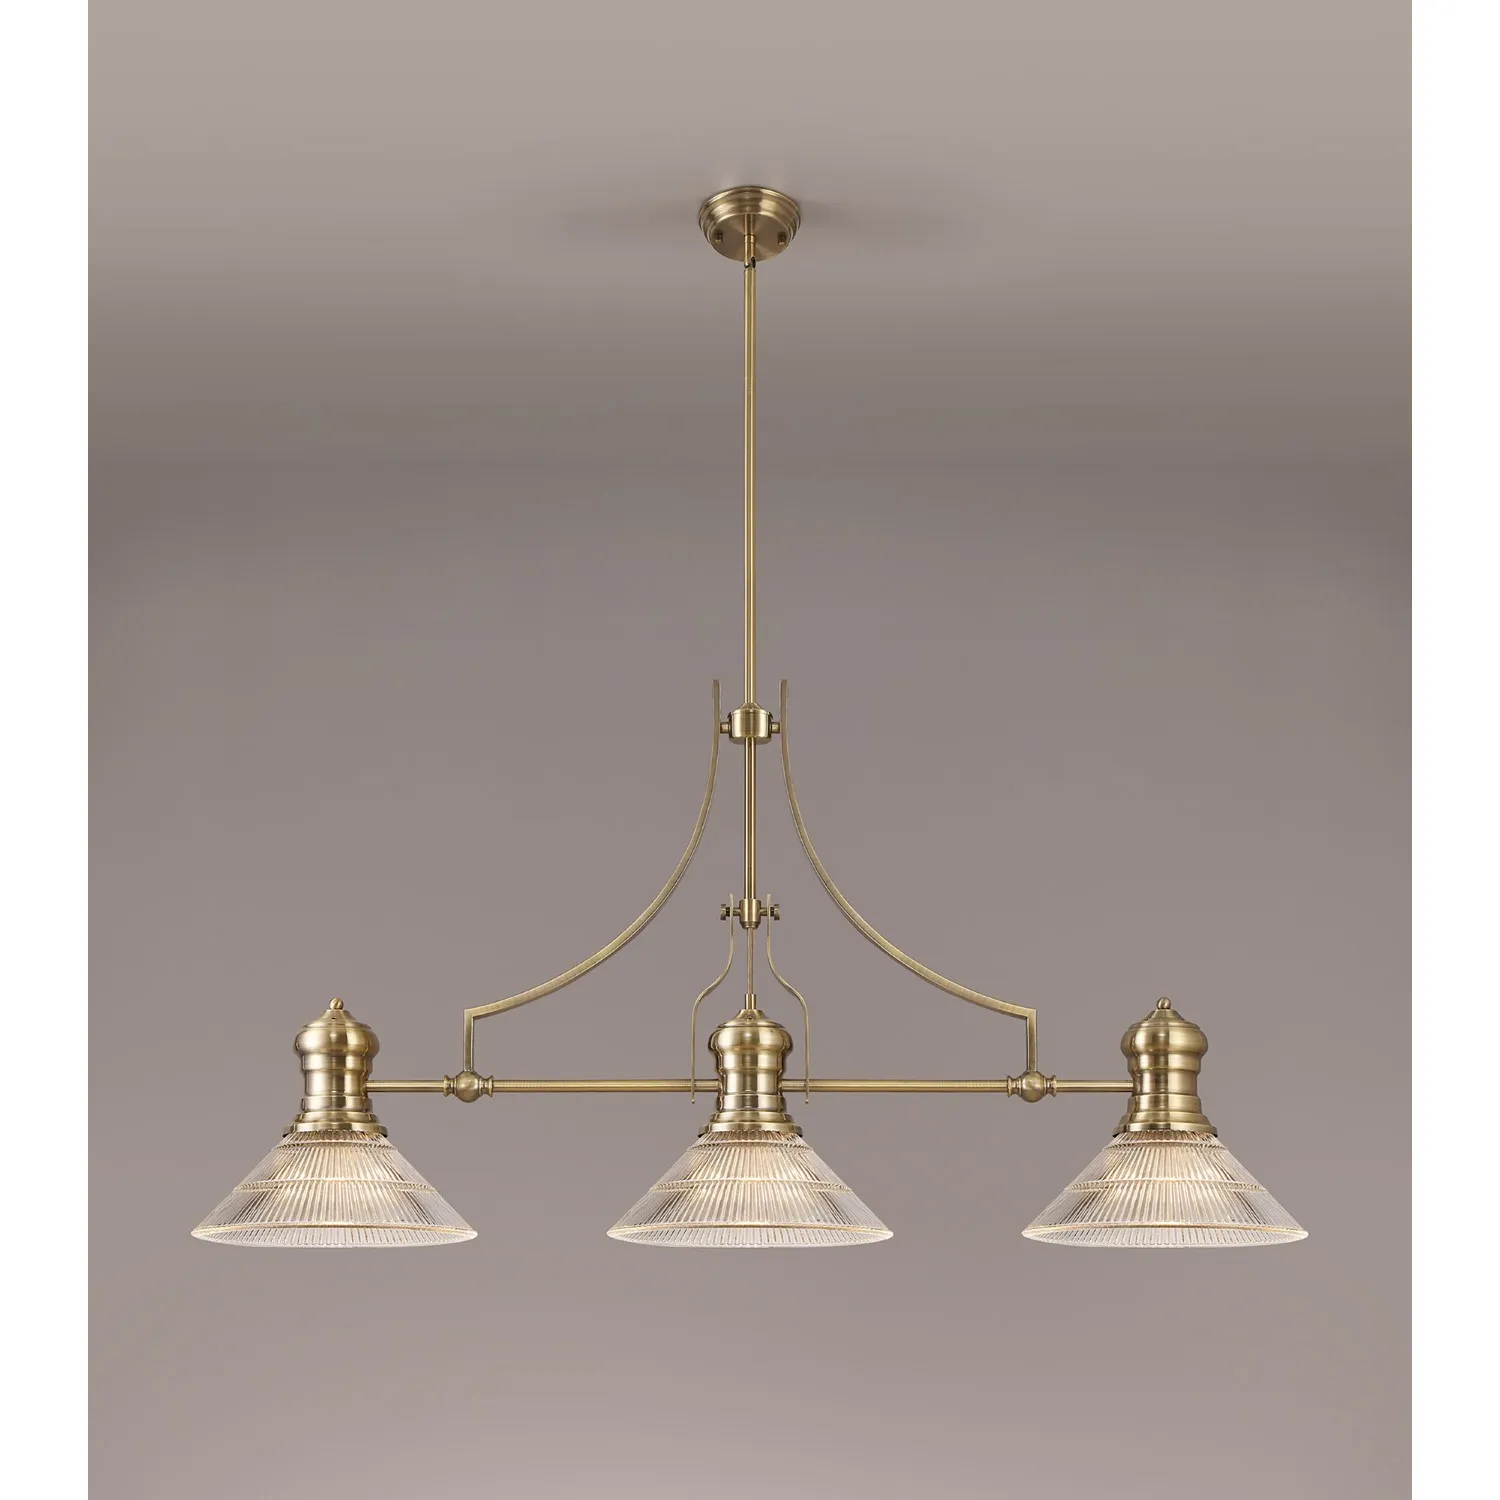 Sandy 3 Light Linear Pendant E27 With 30cm Cone Glass Shade, Antique Brass, Clear